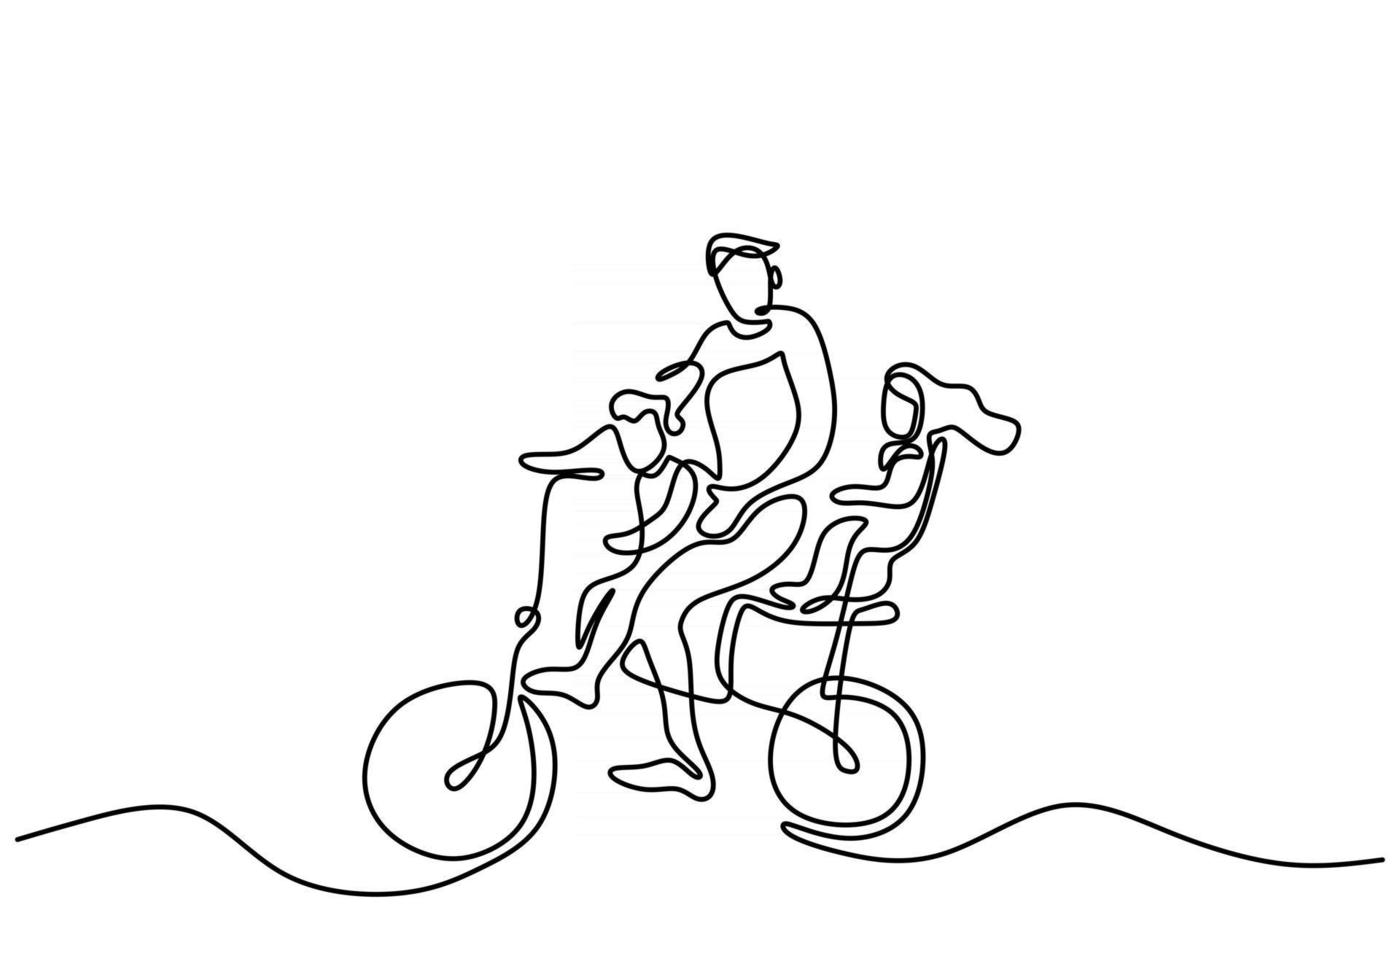 Father with his little son and daughter riding bicycles together continuous one line hand drawn art minimalist style vector